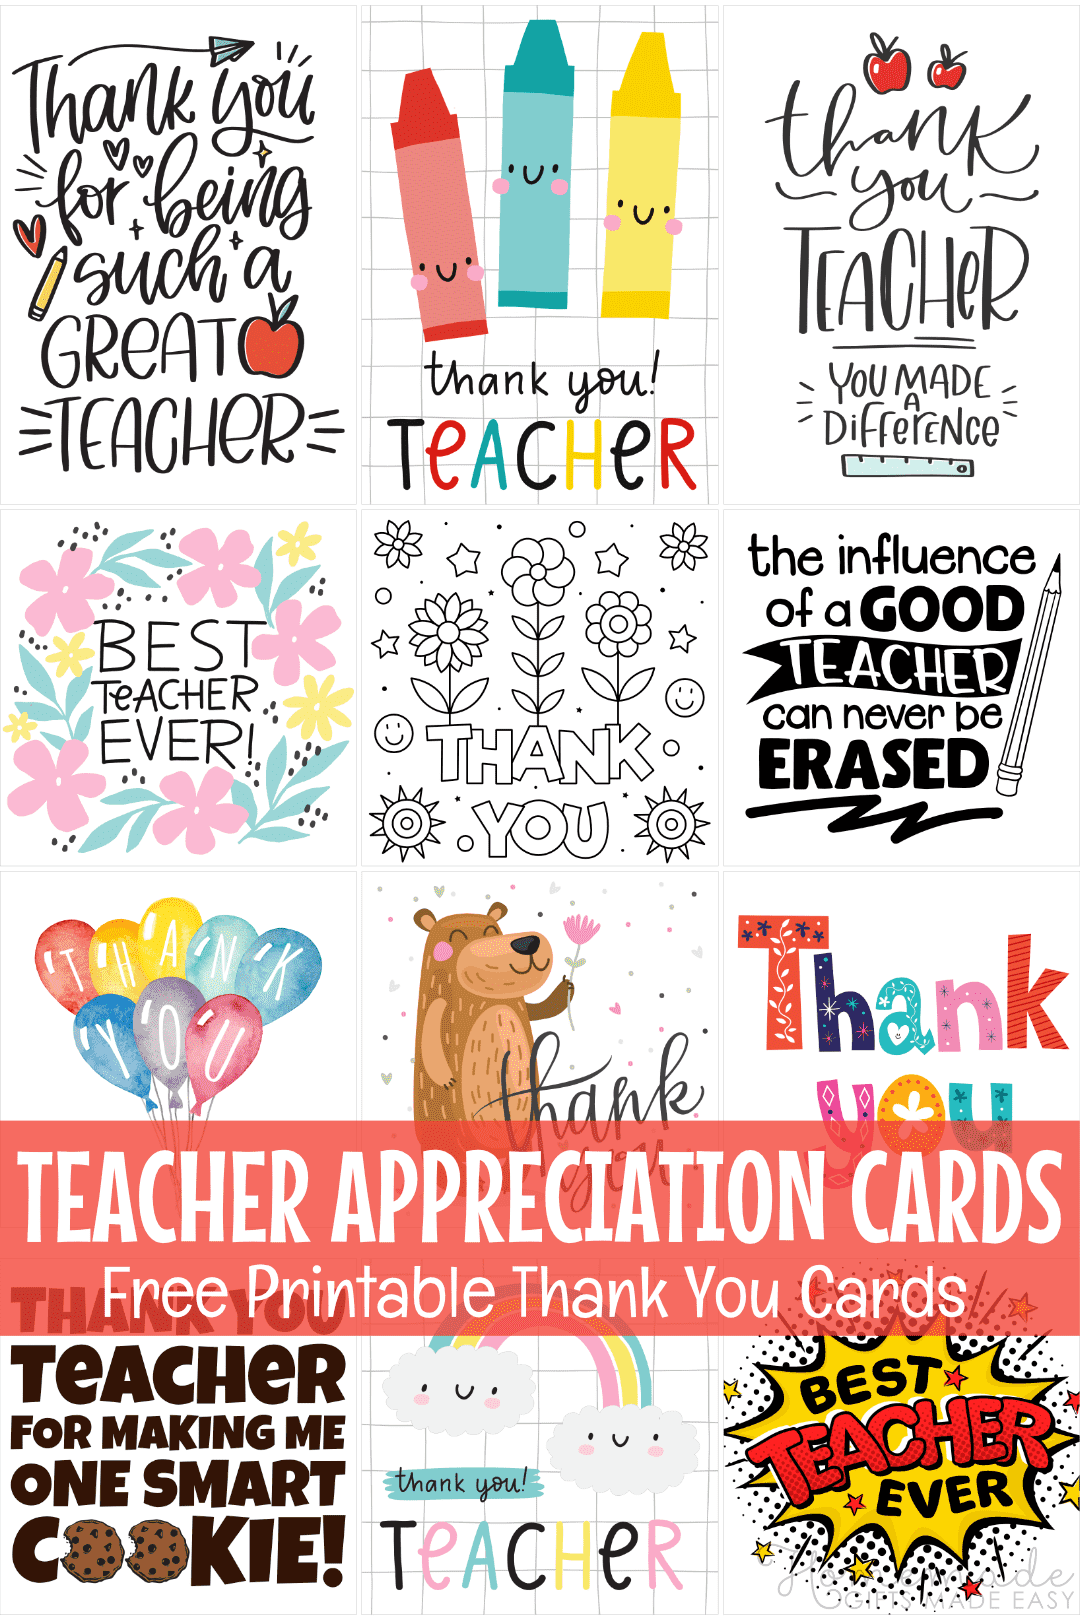 free-teacher-appreciation-cards-to-print-at-home